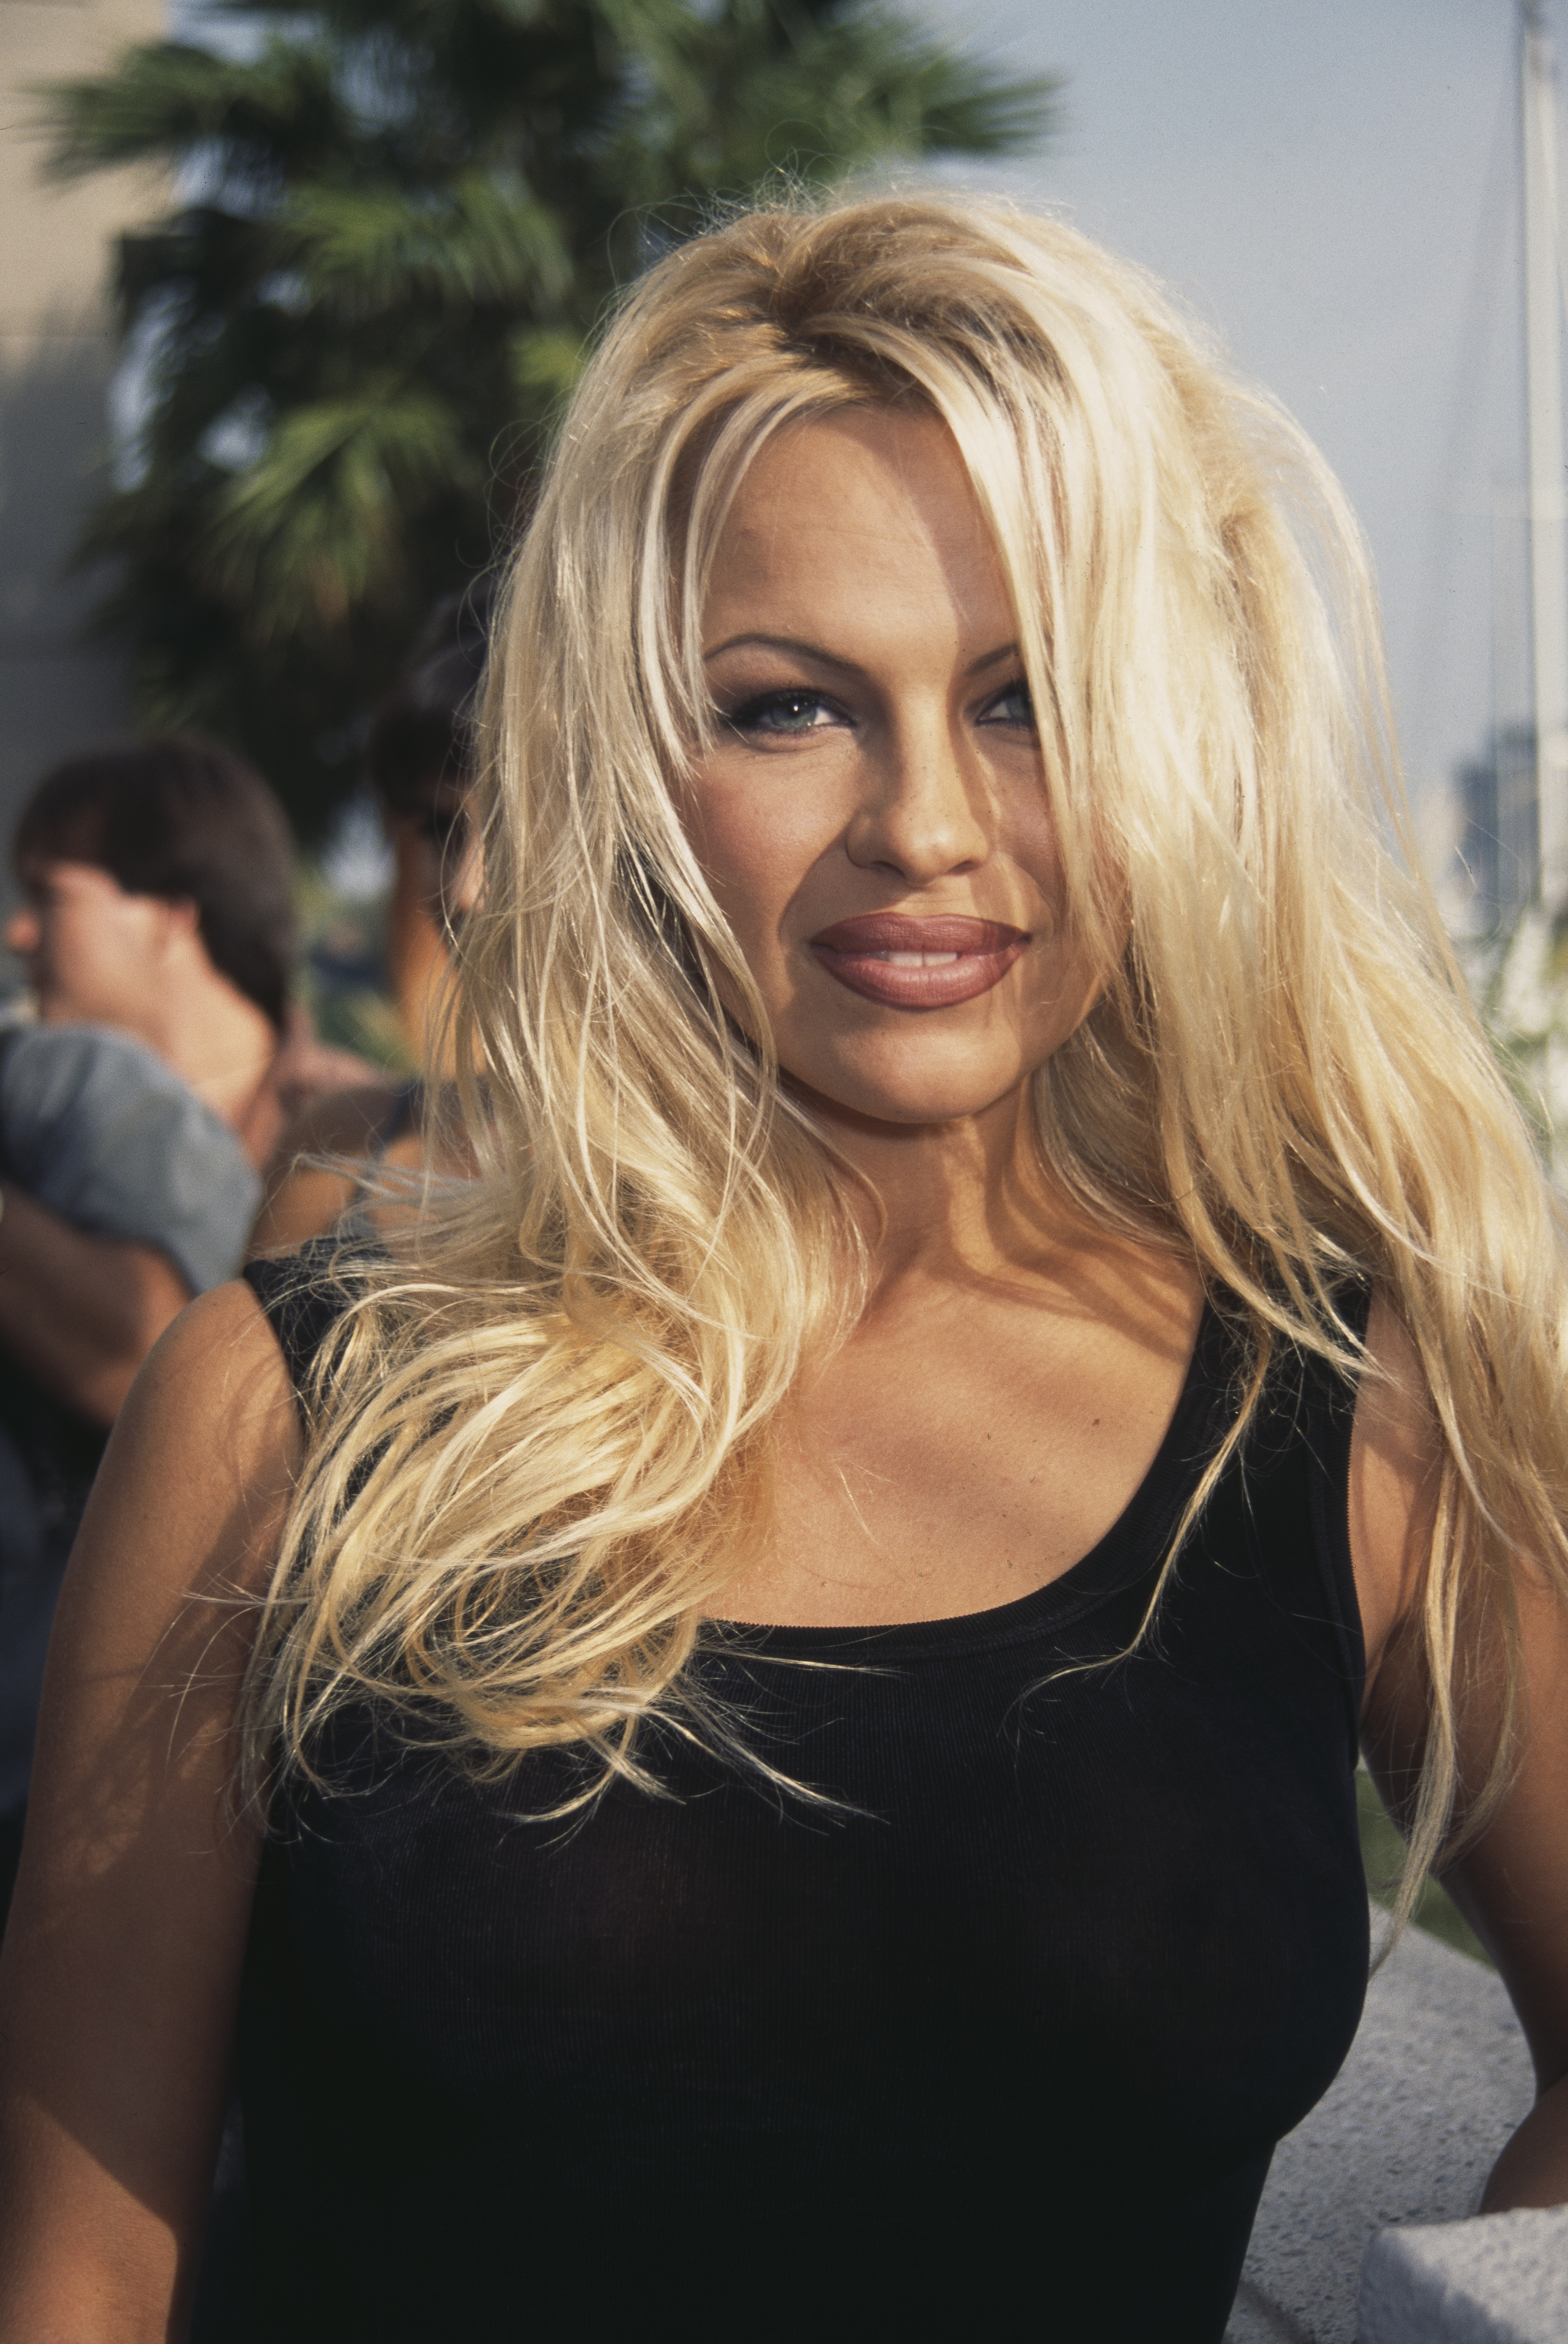 Pamela Anderson attends a "Baywatch" cast party, on Malibu Pier in Malibu, California, 21st October 1994. | Source: Getty Images